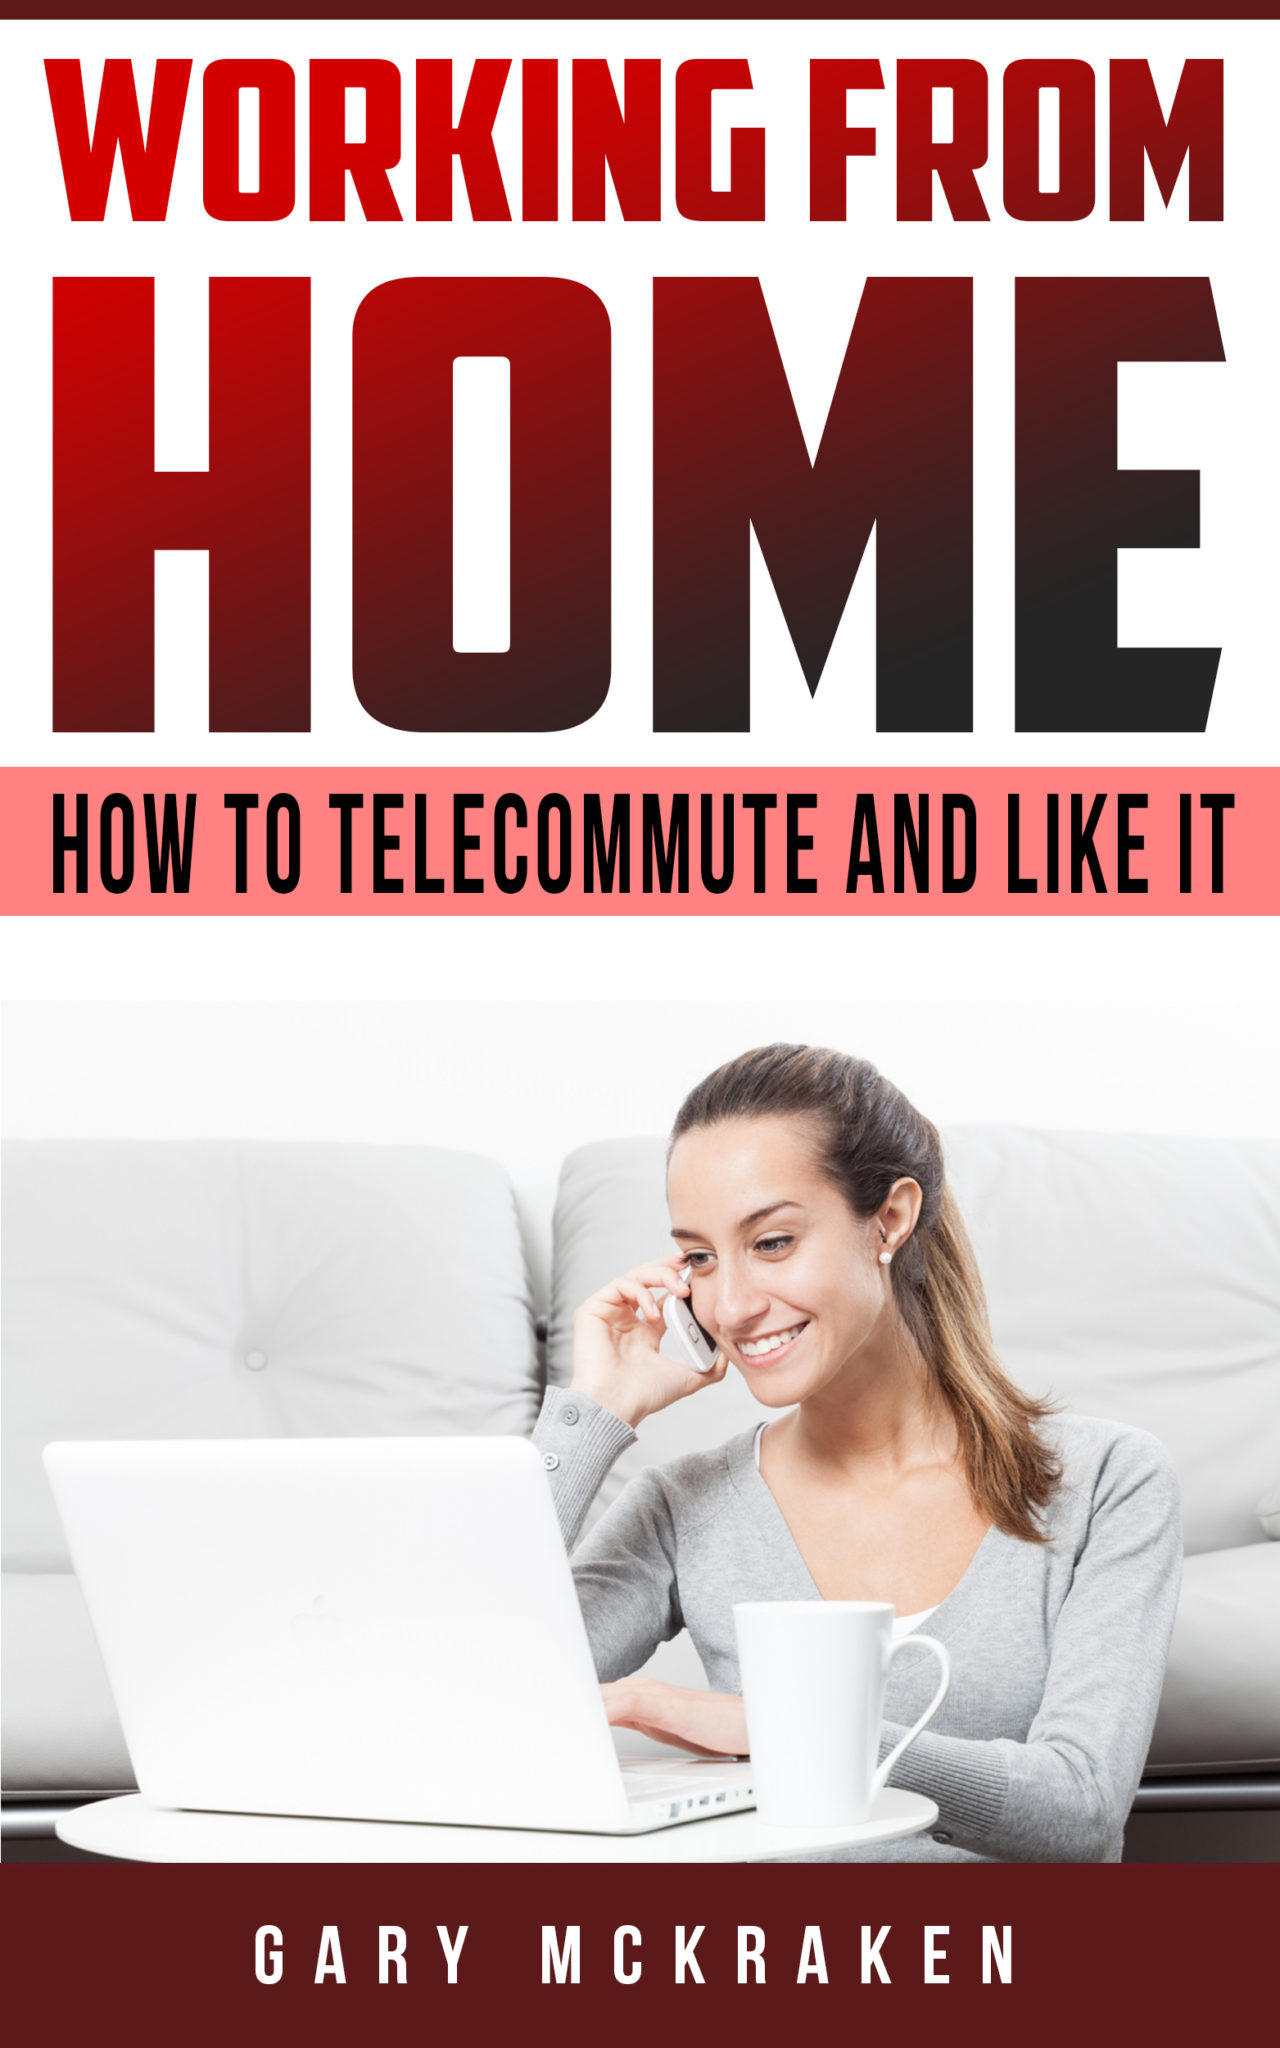 FREE: Working From Home. How to Telecommute and Like It. by Gary McKraken